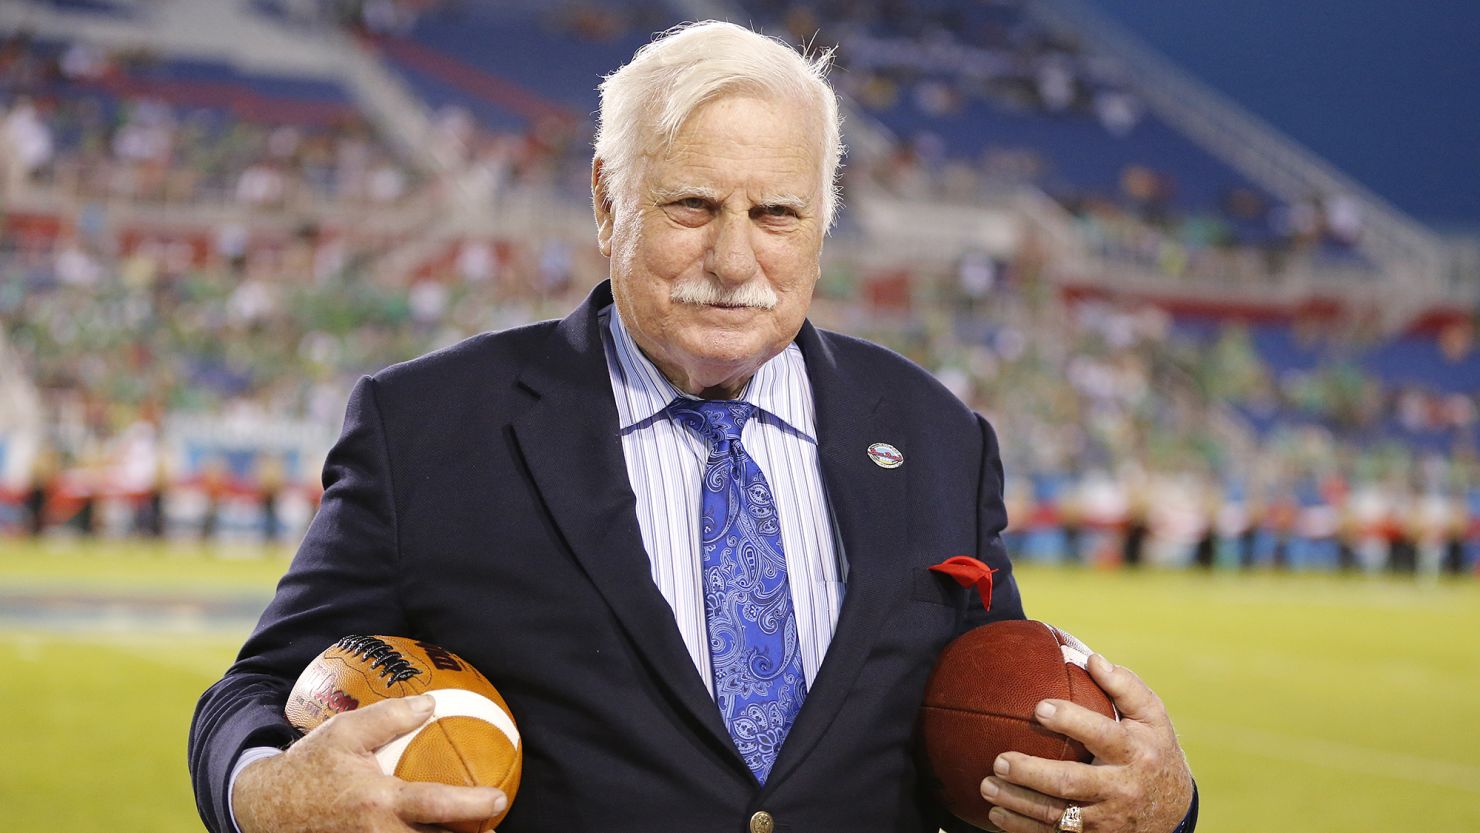 Howard Schnellenberger holds the game balls prior to the start of the Boca Raton Bowl between Marshall and Northern Illinois at FAU Stadium in Boca Raton, Florida, on Dec. 23, 2014.